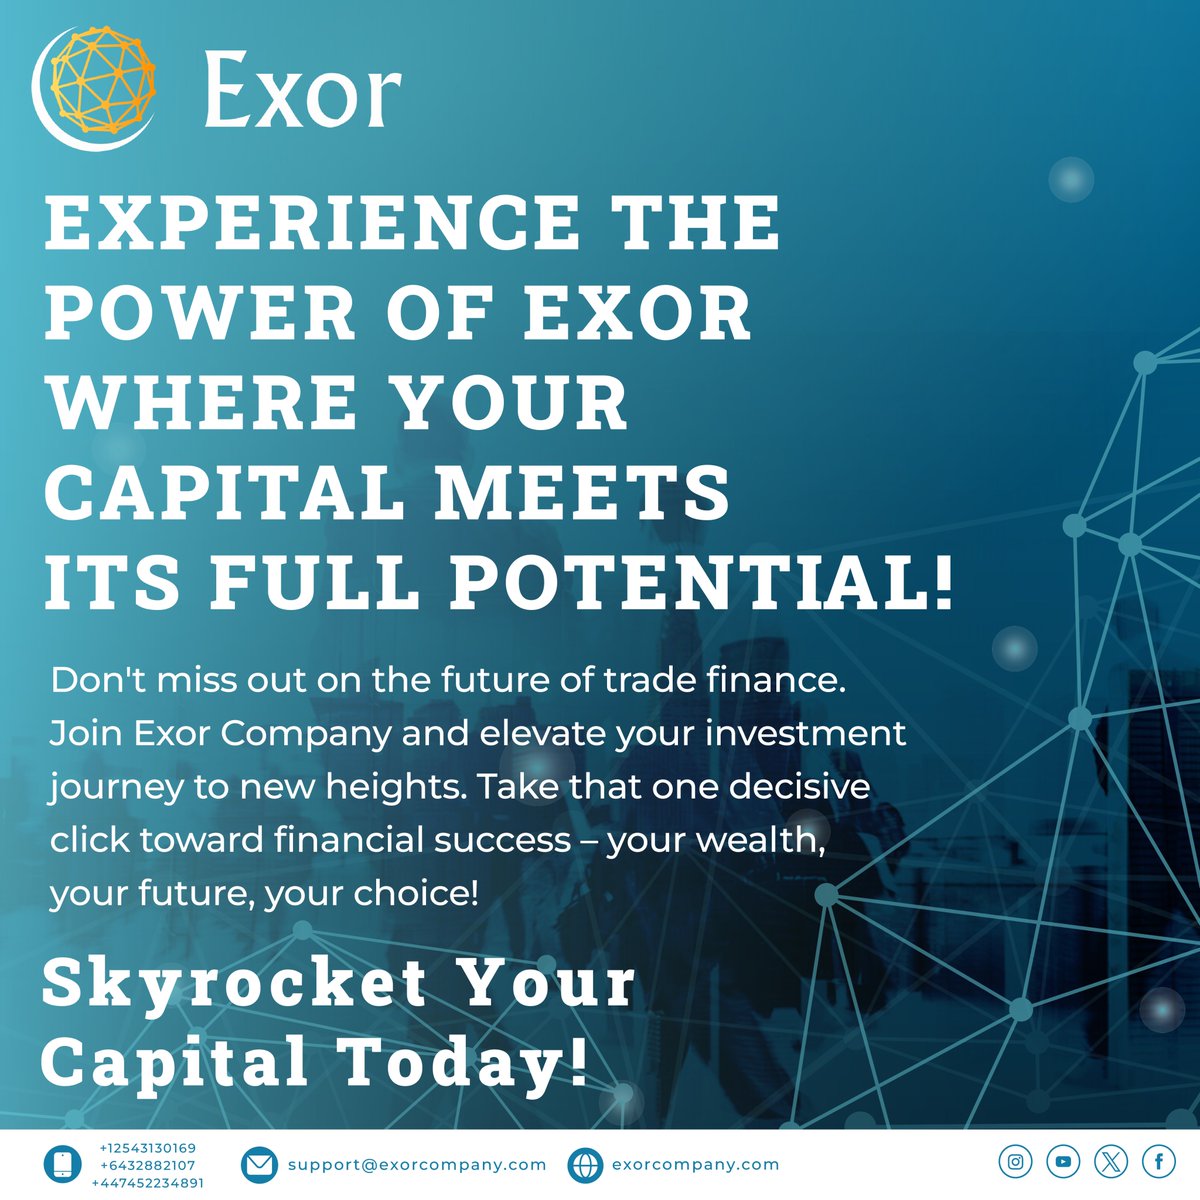 Embark on a transformative journey with Exor
Unleash the power of your capital and explore boundless possibilities in trade finance.
Join us at exorcompany.com to elevate your investment game 
Your wealth, your future, your choice!
#ExperienceExor #InvestWisely